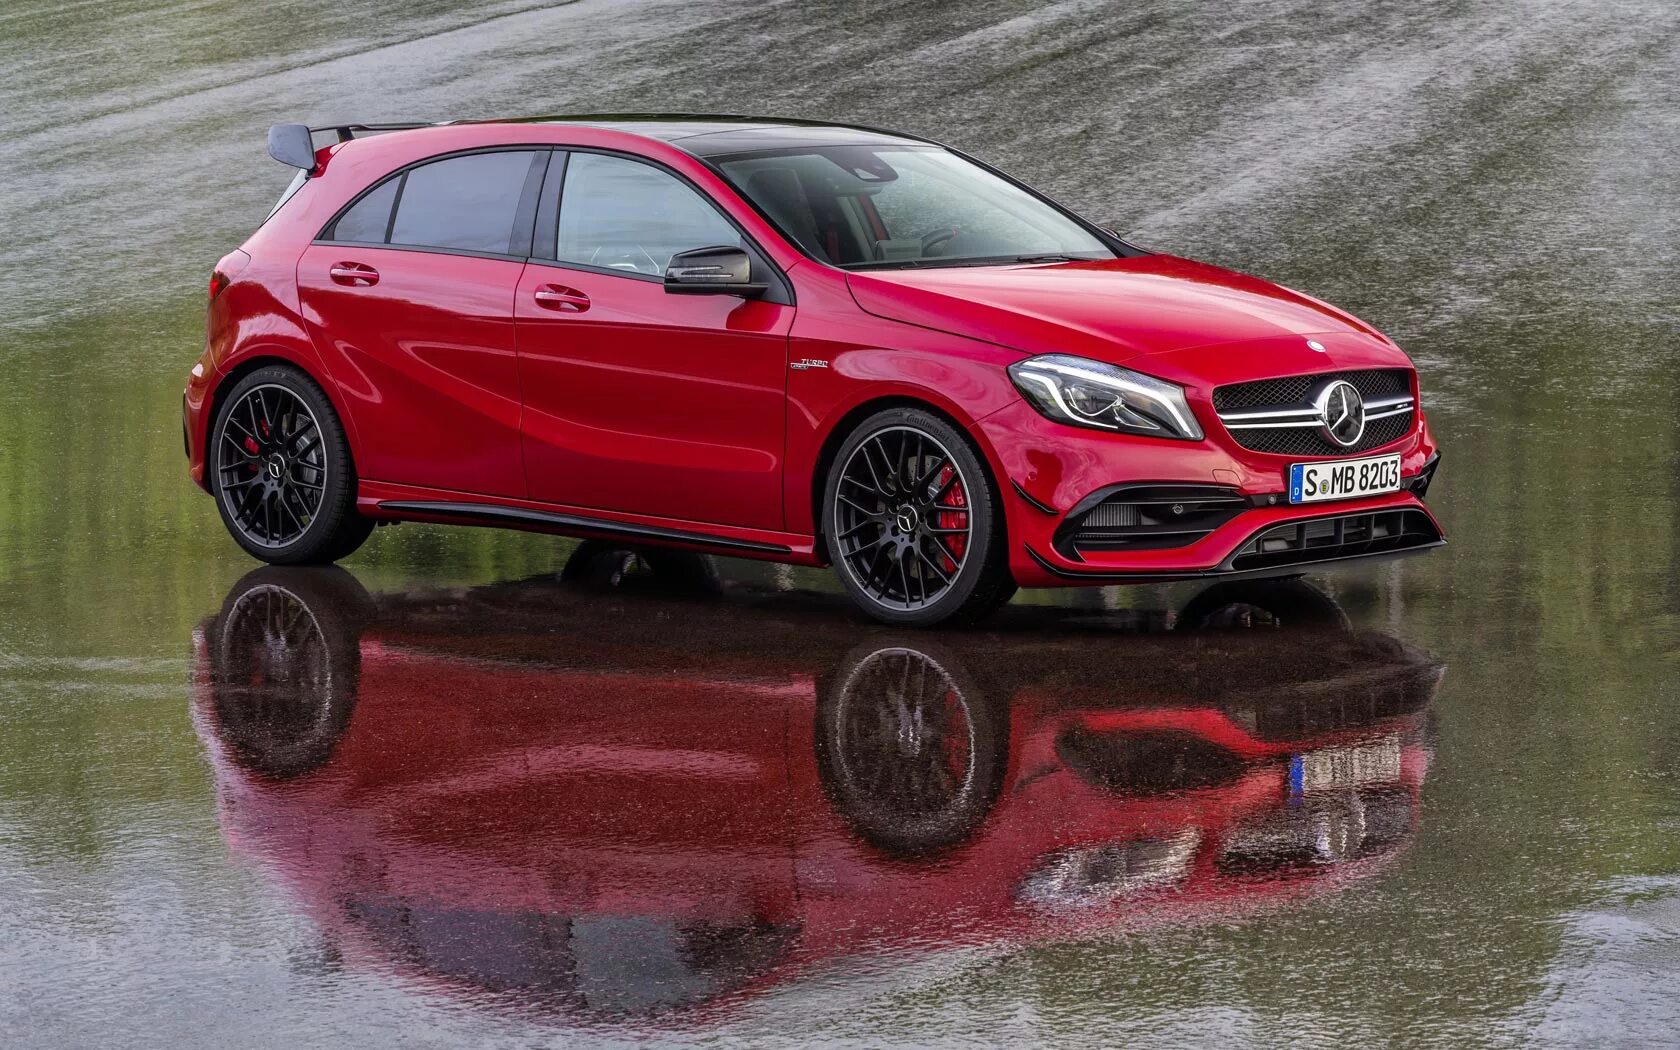 Мерседес а45 АМГ. Mercedes a class AMG a45. Mercedes Benz w176. Mercedes-Benz a-class w176.